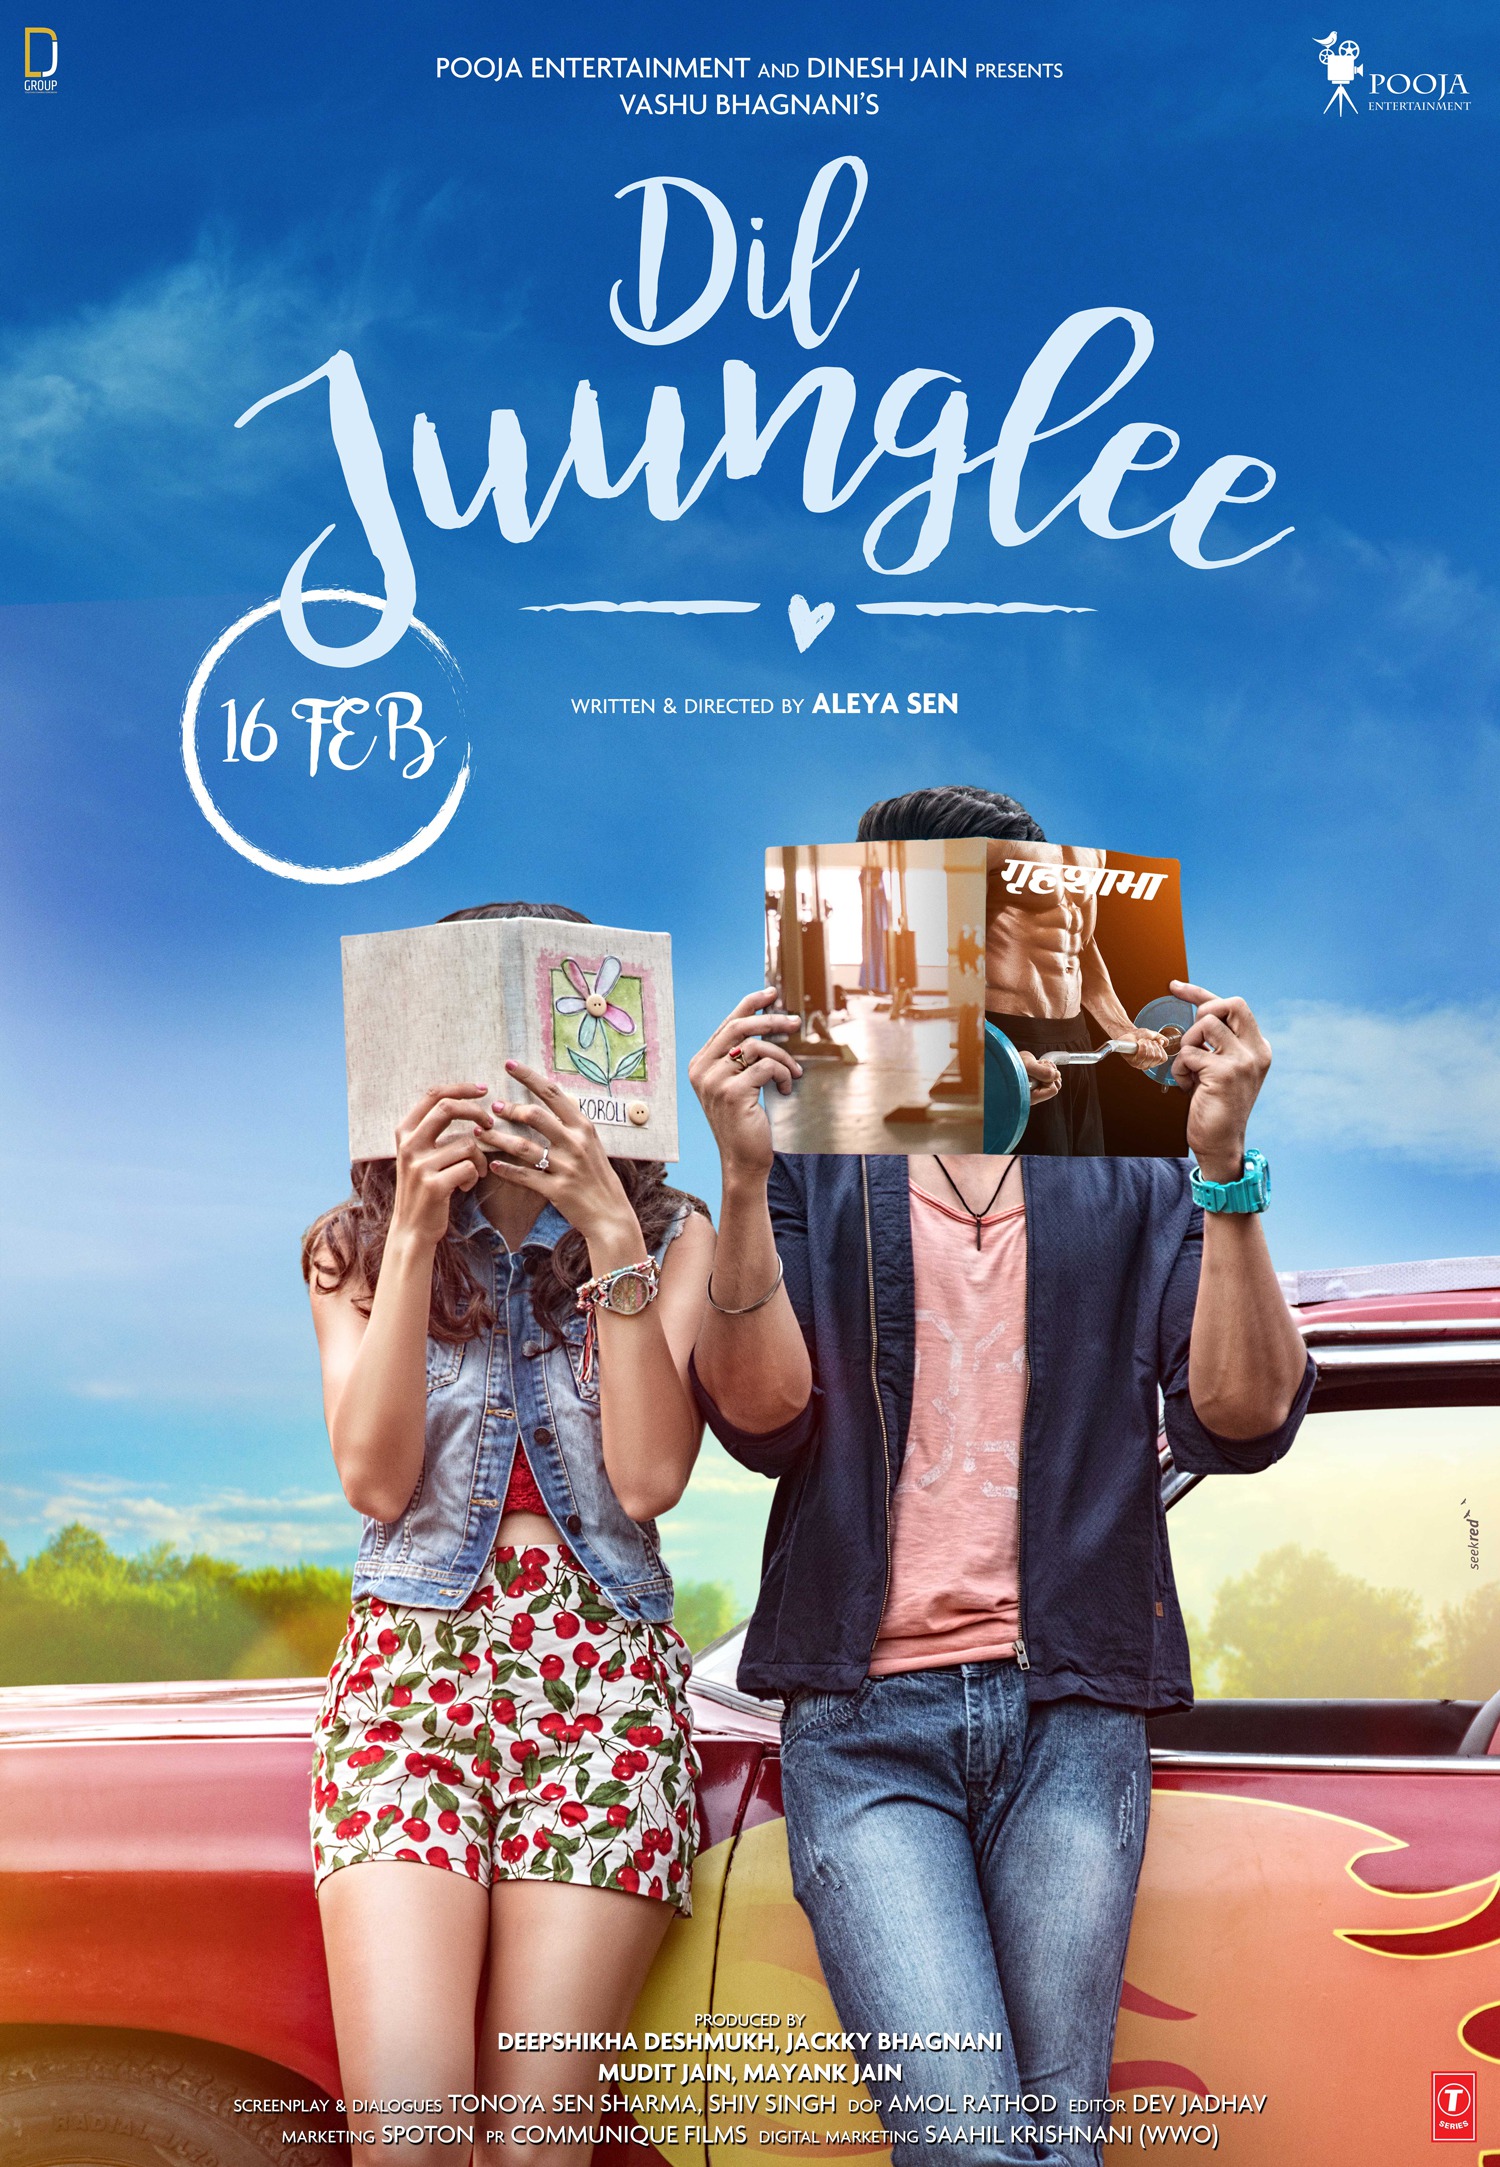 Mega Sized Movie Poster Image for Dil Juunglee (#1 of 2)